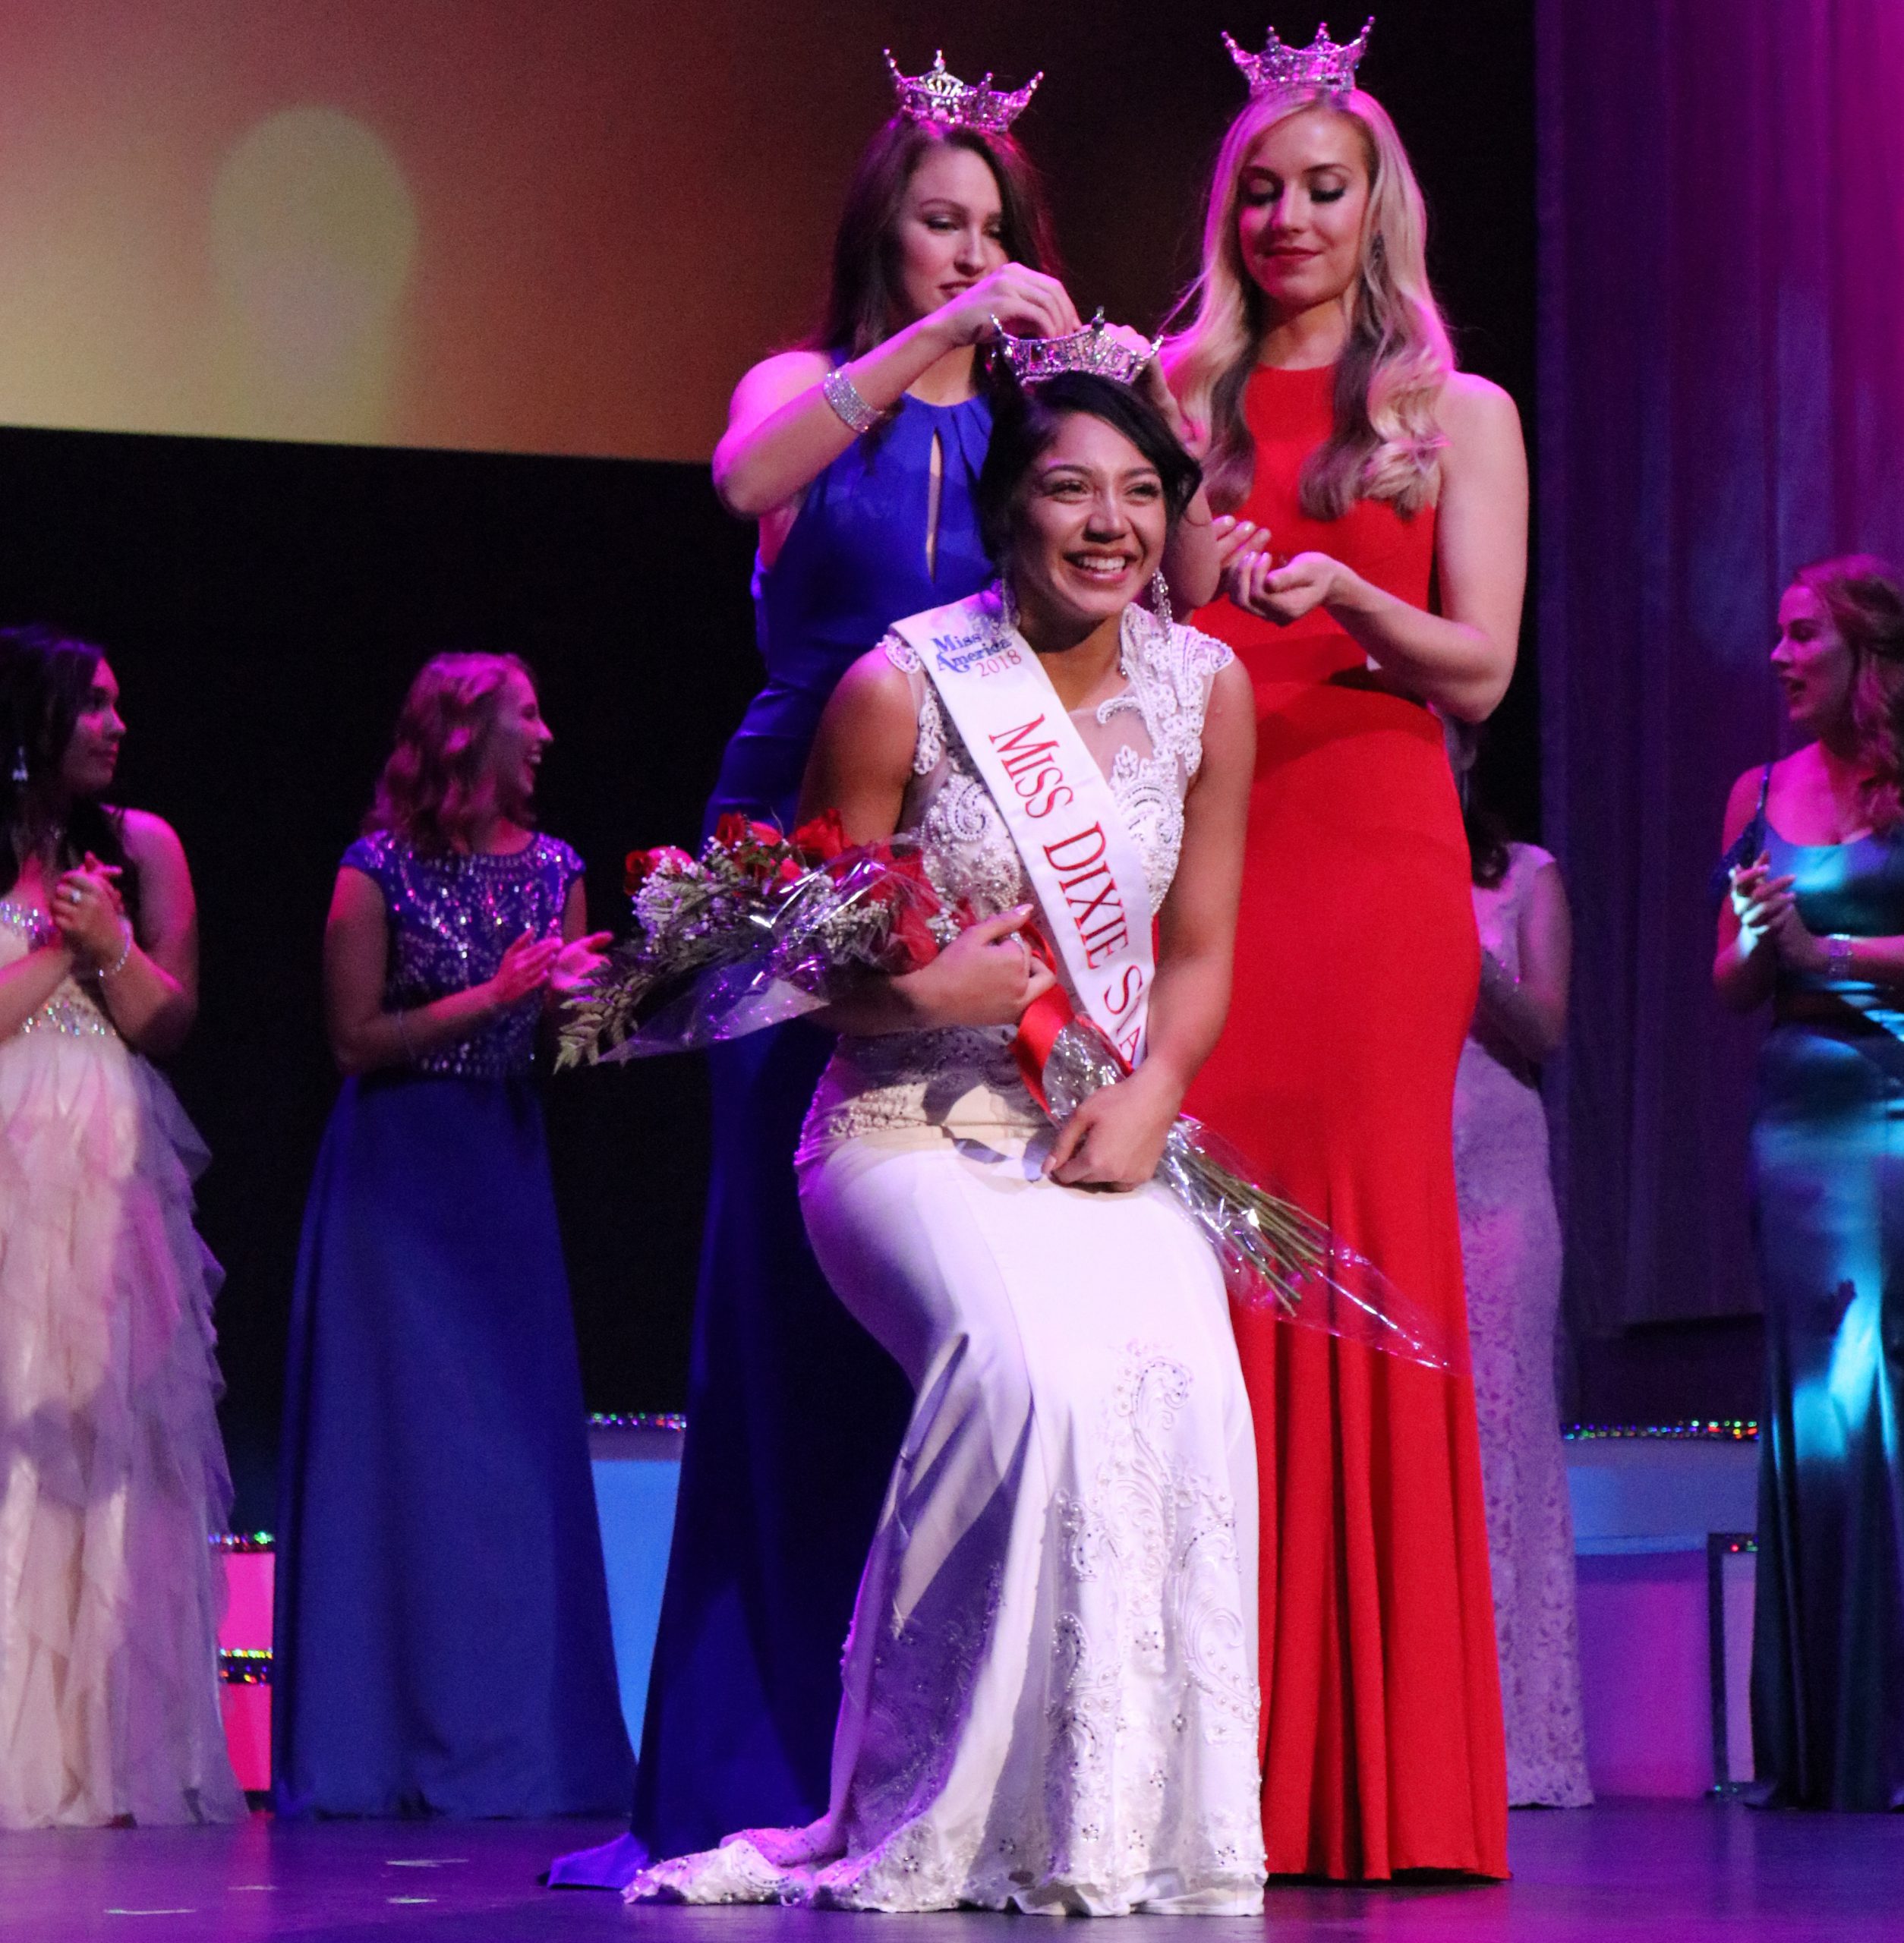 Miss Dixie 2018 crowned, strives to “Live Naturally High”